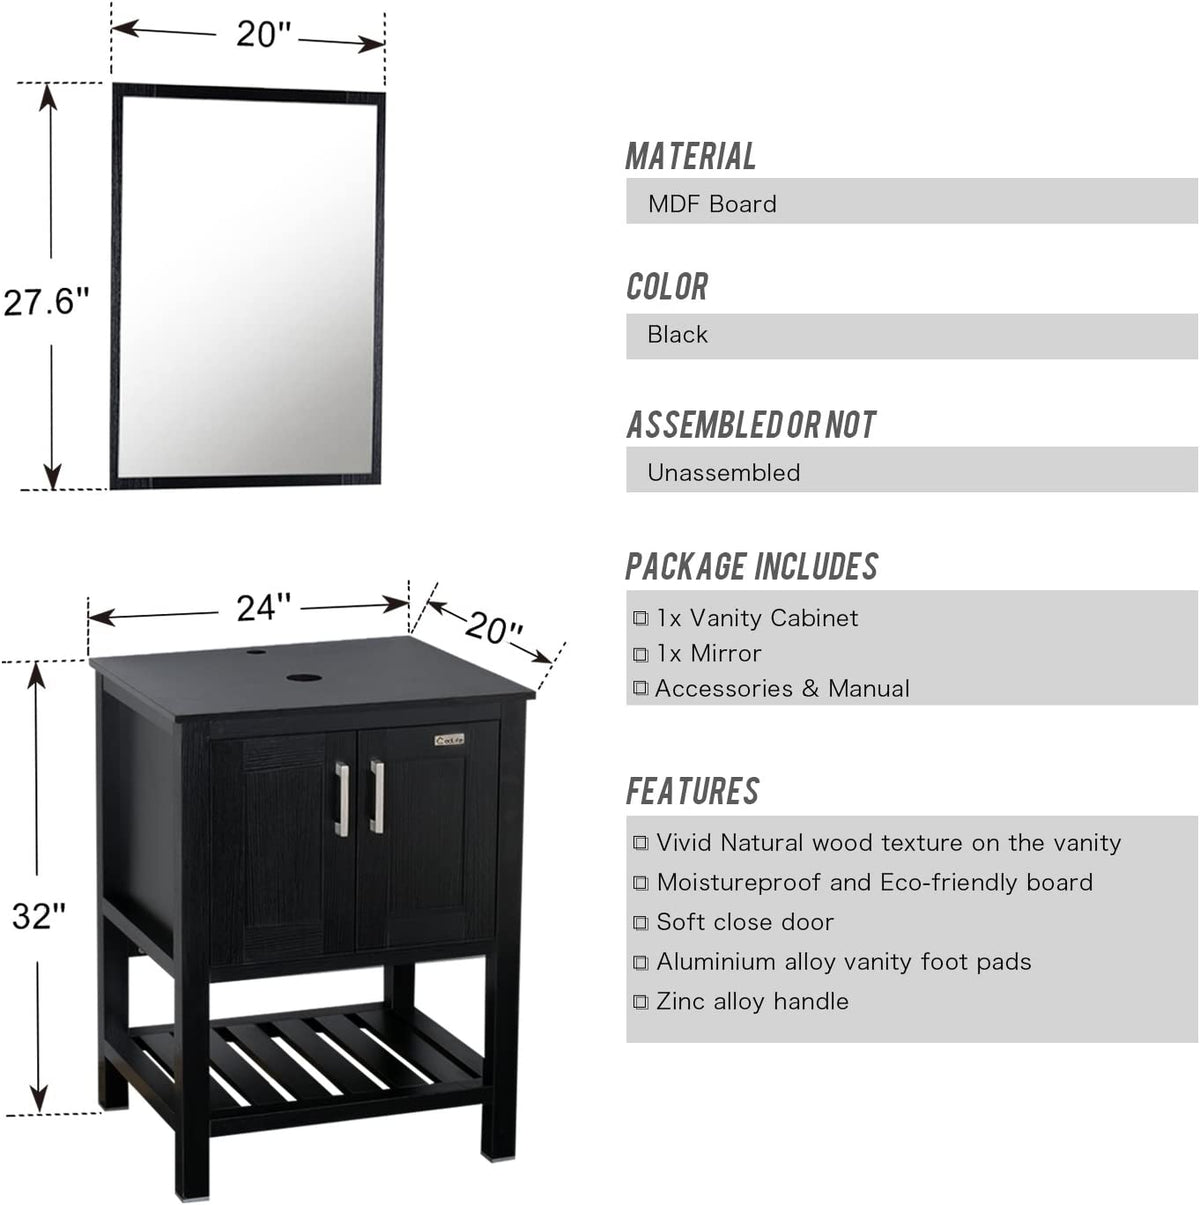 48” Bathroom Vanity Sink Combo Black W/Side Cabinet, Square White Ceramic Vessel Sink, Chrome Bathroom Solid Brass Faucet and Pop Up Drain Combo, with Mirror